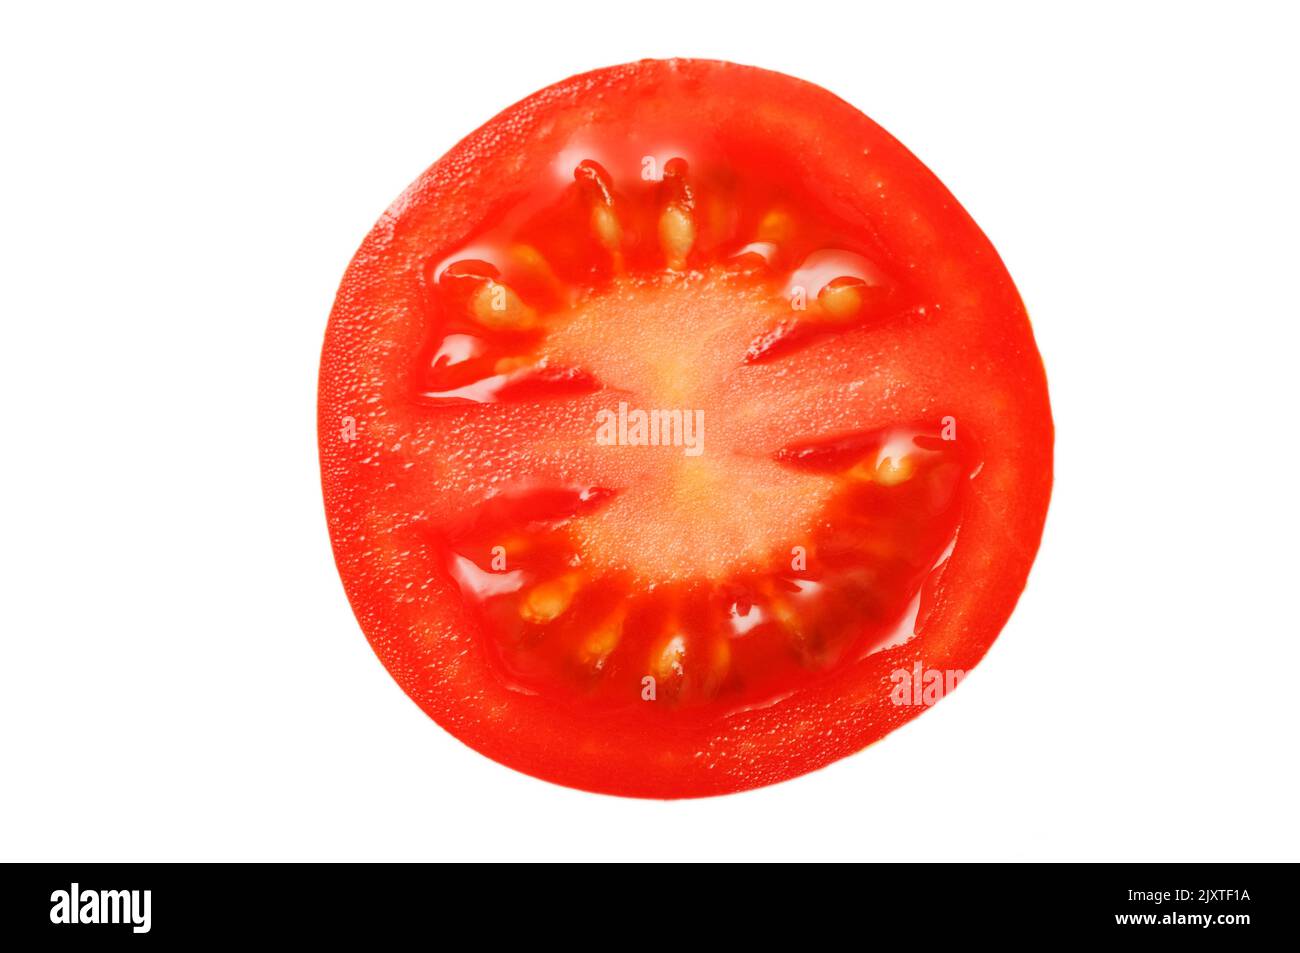 Cross section of a red tomato (lat: Solanum lycopersicum) isolated on white. Stock Photo